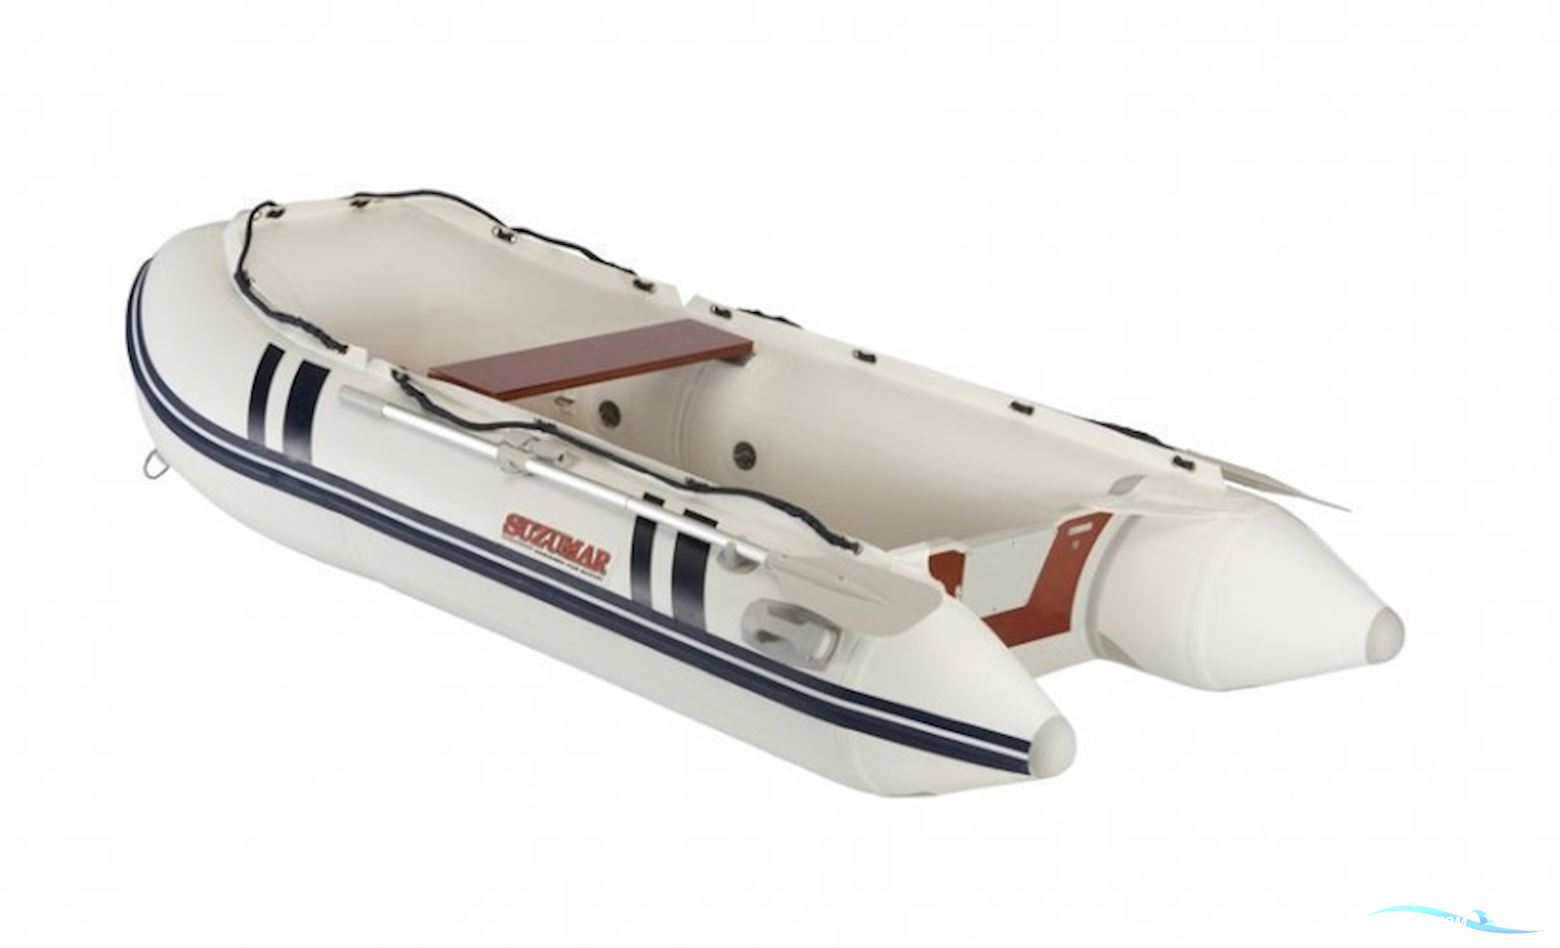 Suzumar DS 320 Alu Inflatable / Rib 2023, The Netherlands